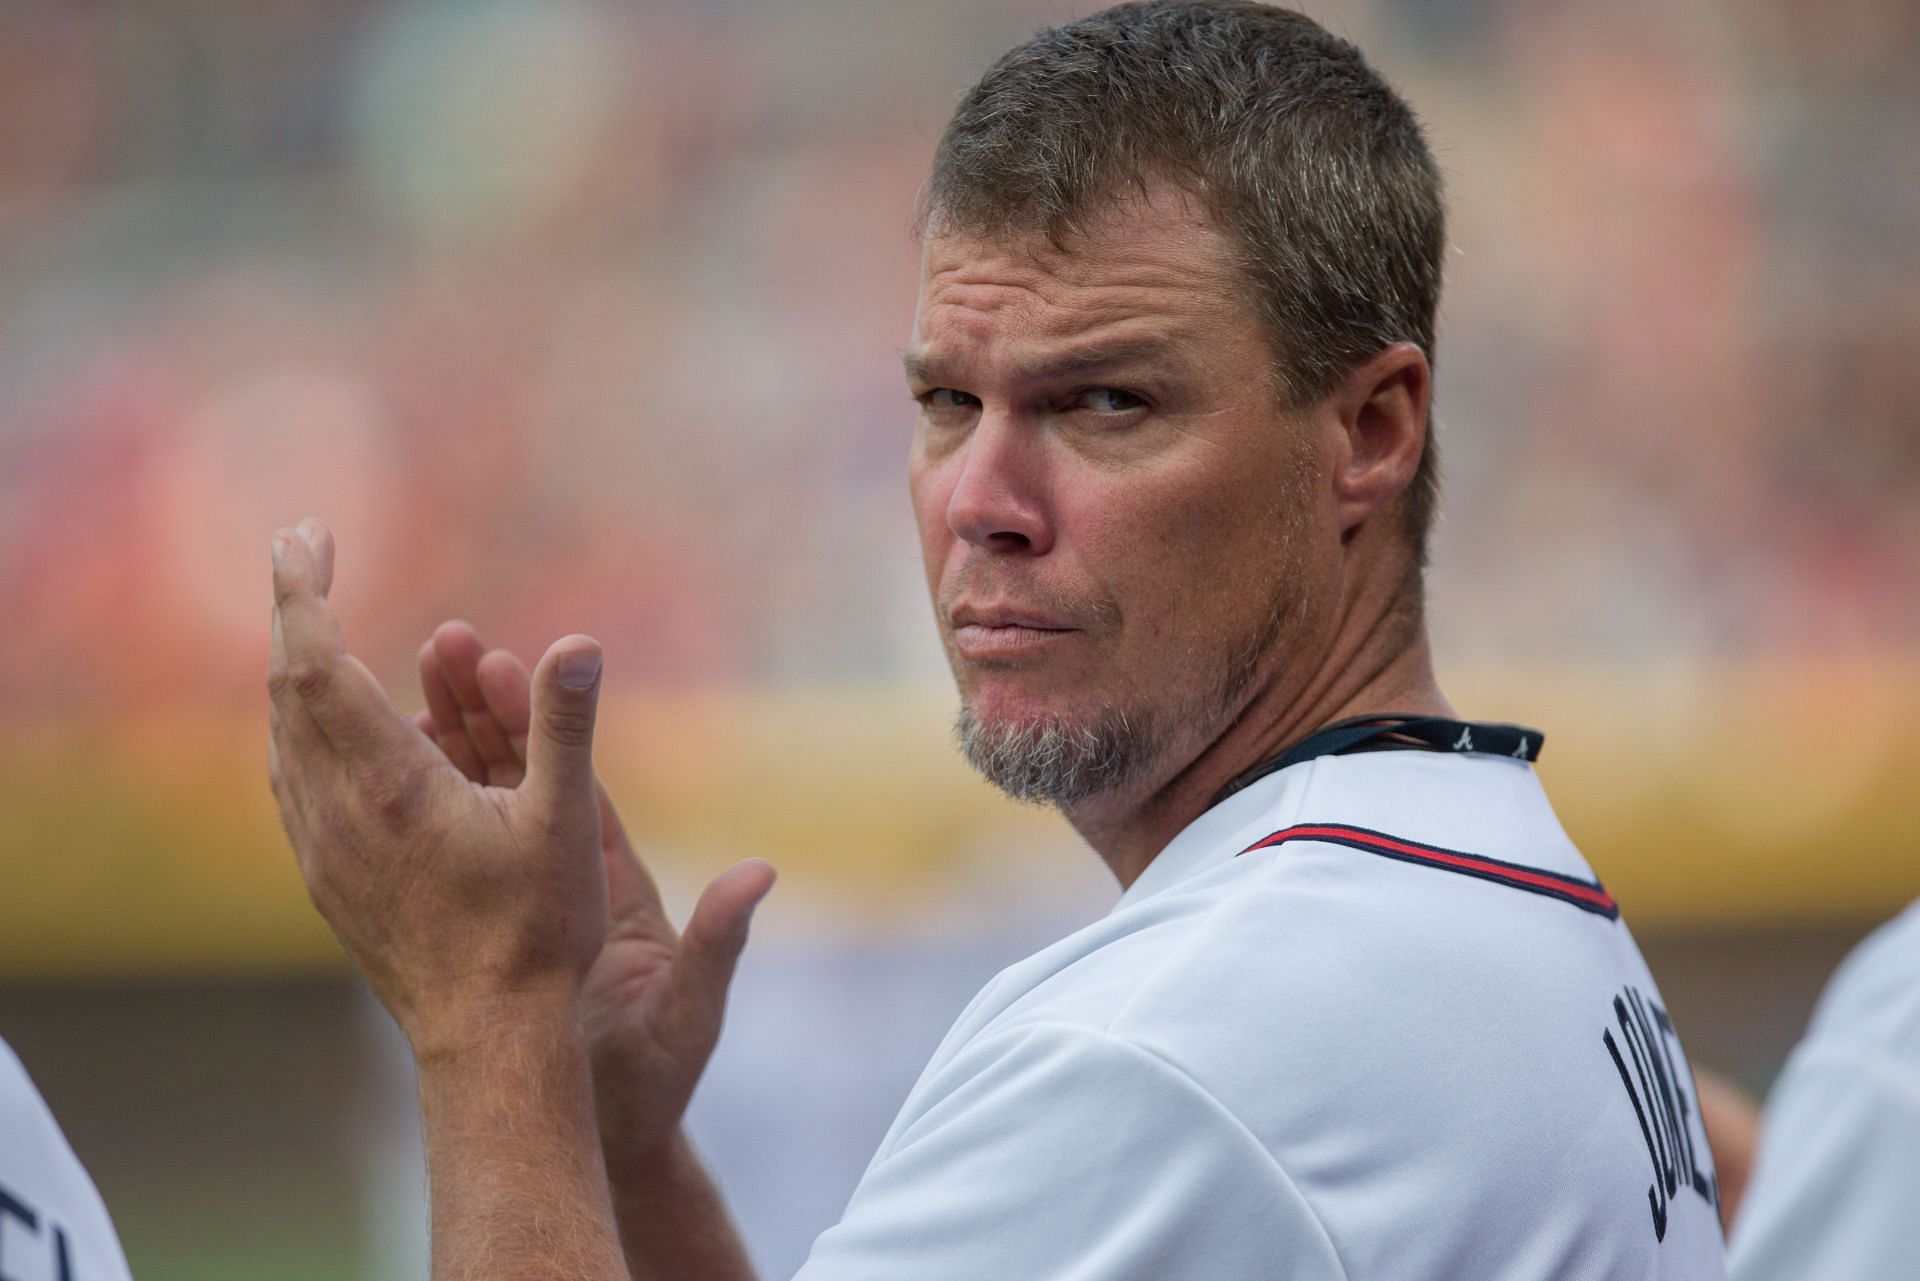 Washington Nationals v Atlanta Braves ATLANTA, GA - AUGUST 8: Former Braves player Chipper Jones participates in a pre-game ceremony honoring many Braves alumni players prior the game against the Washington Nationals at Turner Field on August 8, 2014 in Atlanta, Georgia. (Photo by Kevin Liles/Getty Images)